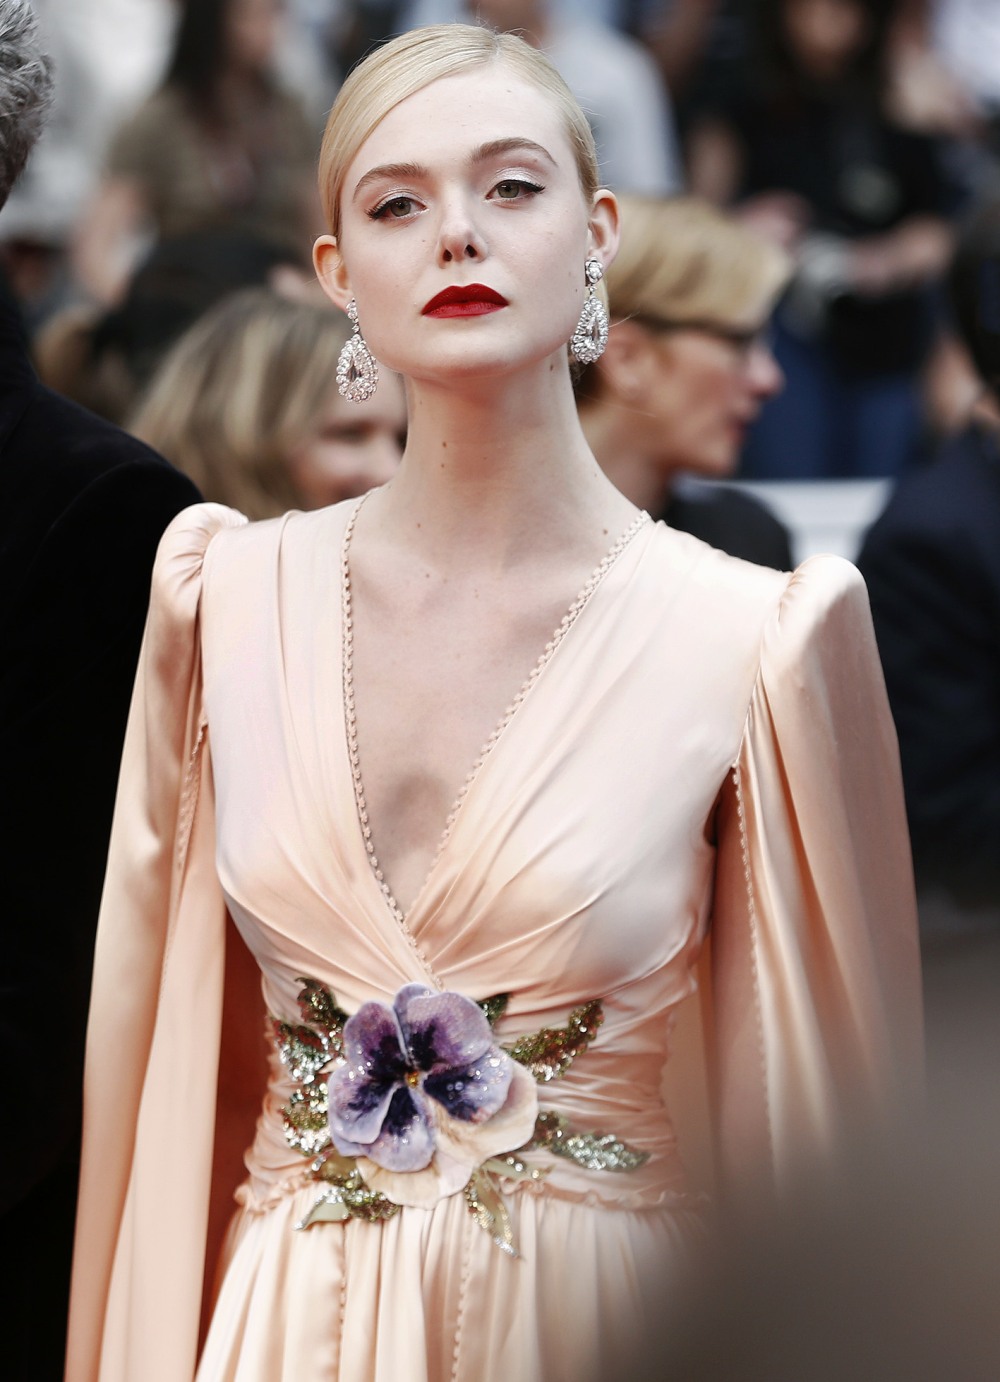 2019 Cannes Film Festival - Opening Ceremony